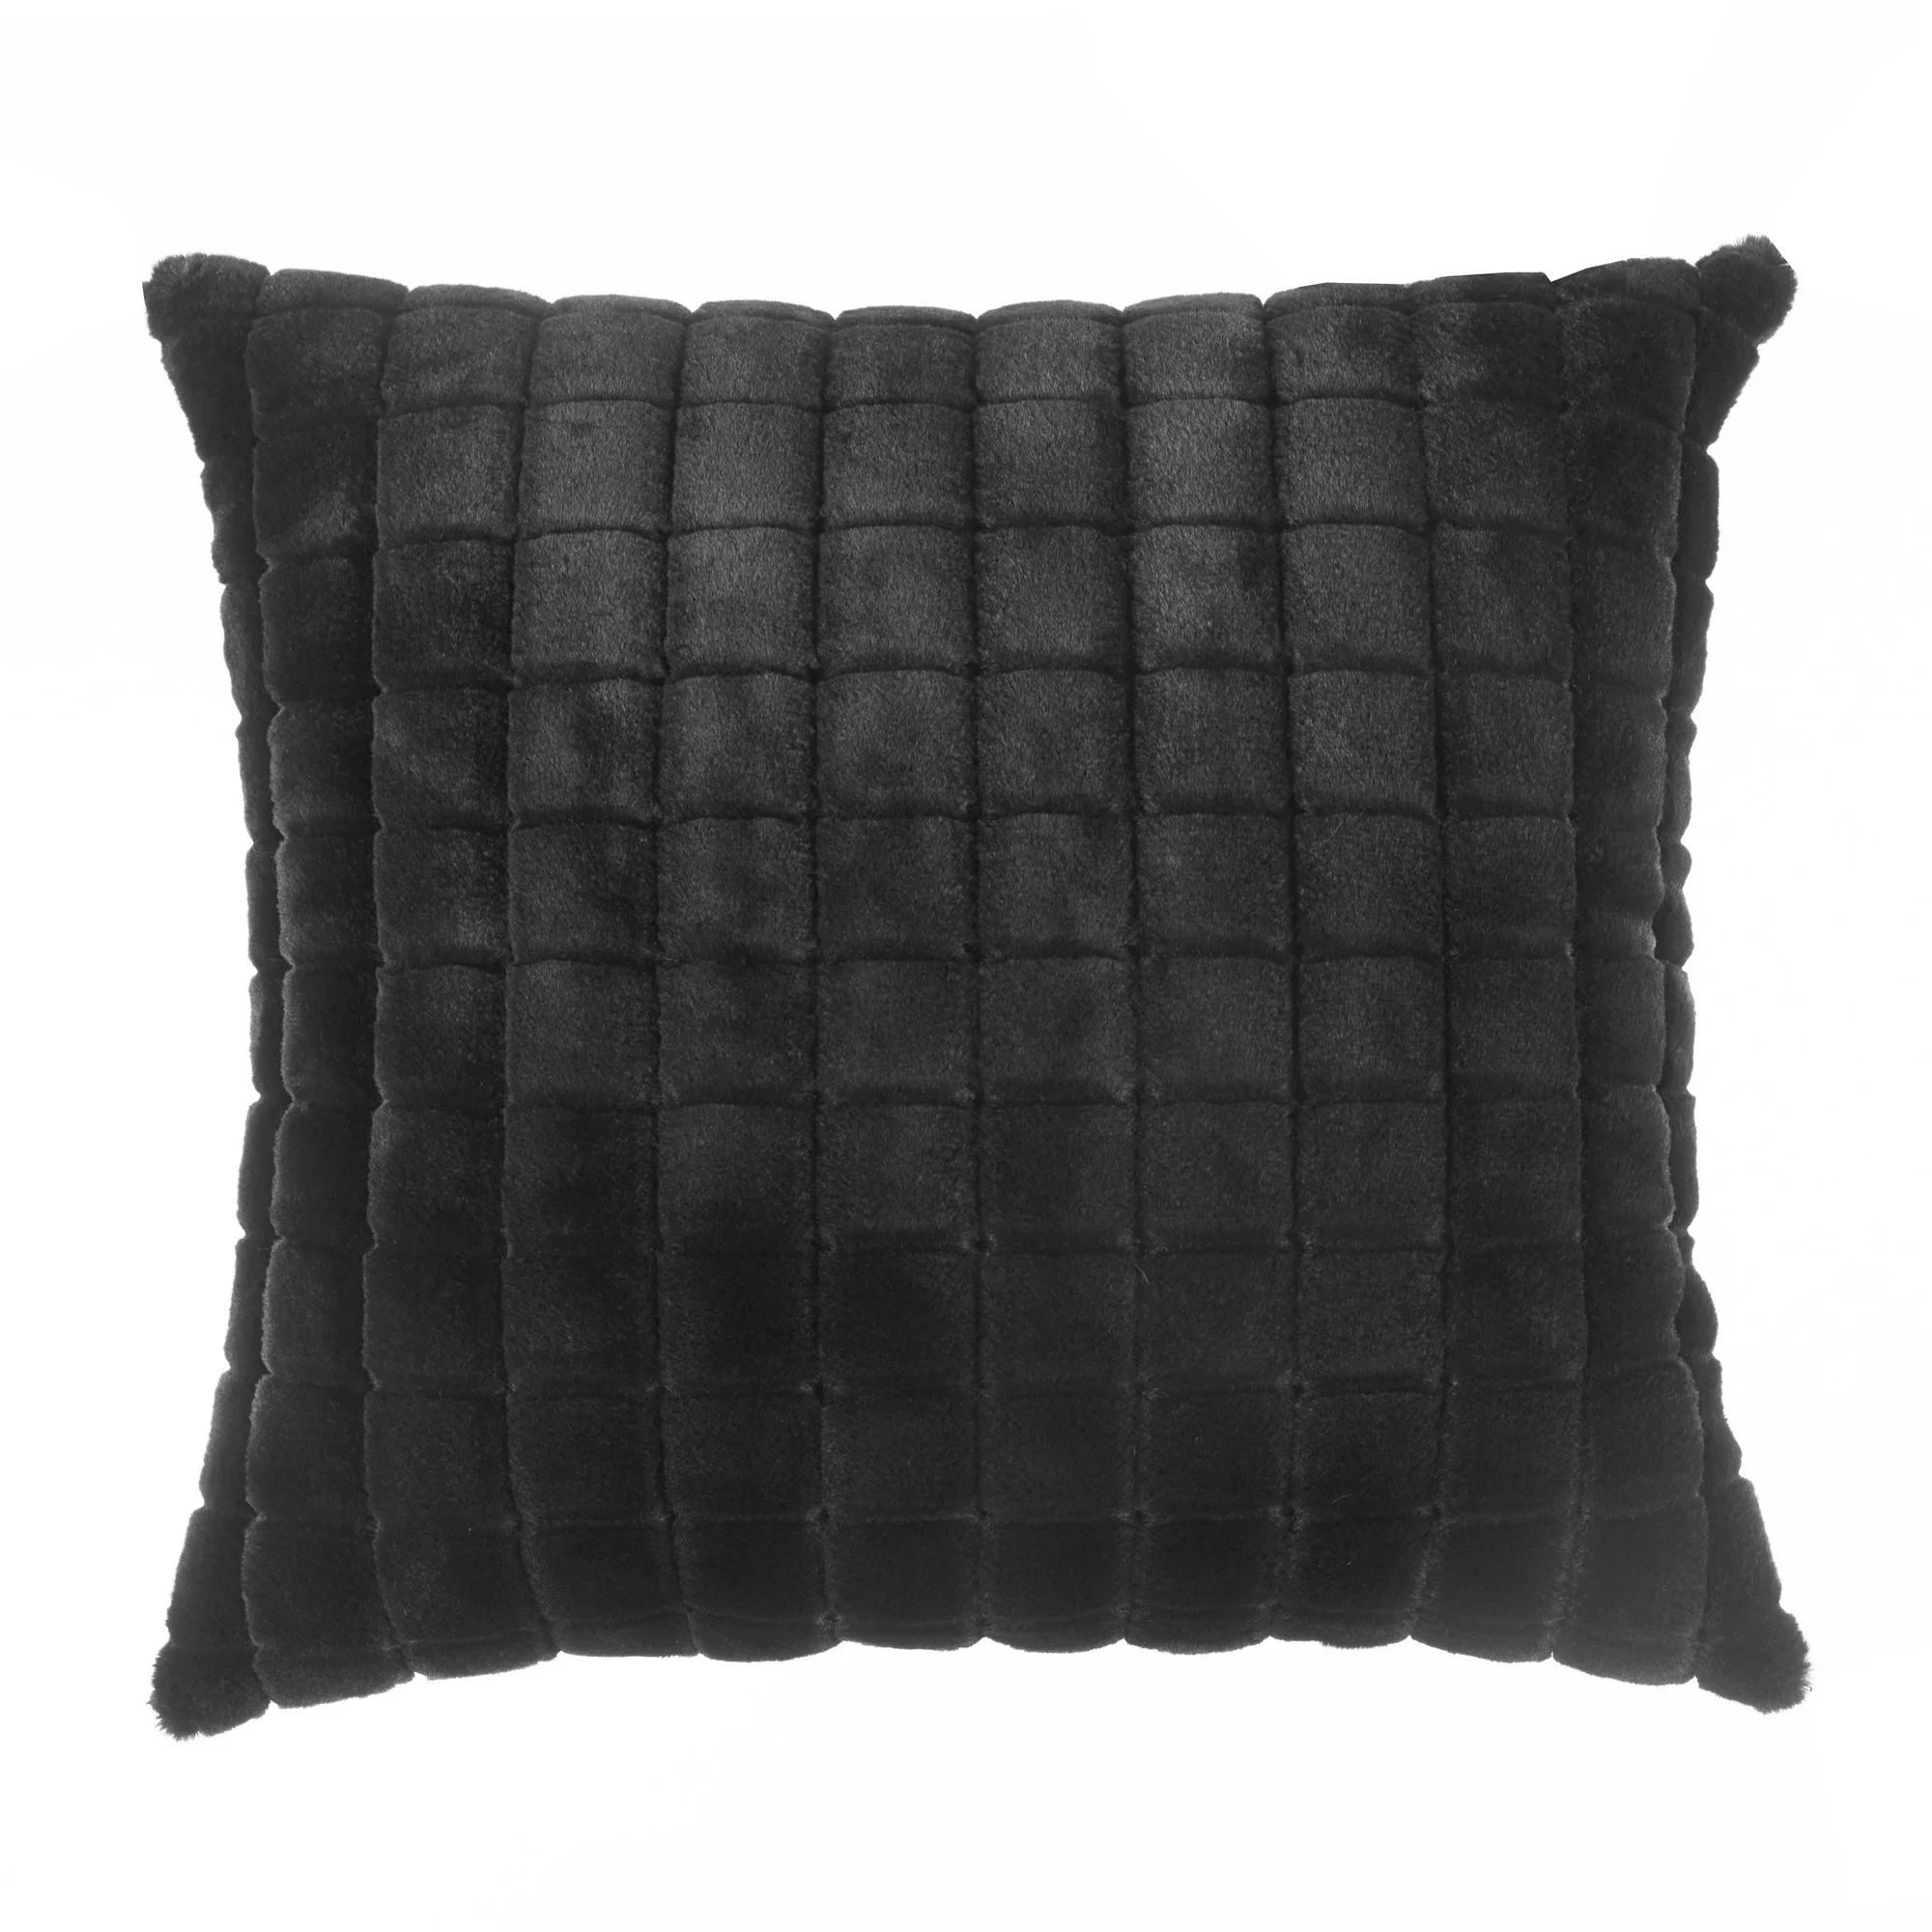 Mainstays Square Tile Faux Fur Black Pillow, 20 in x 20 in, Polyester Fill | Walmart (US)